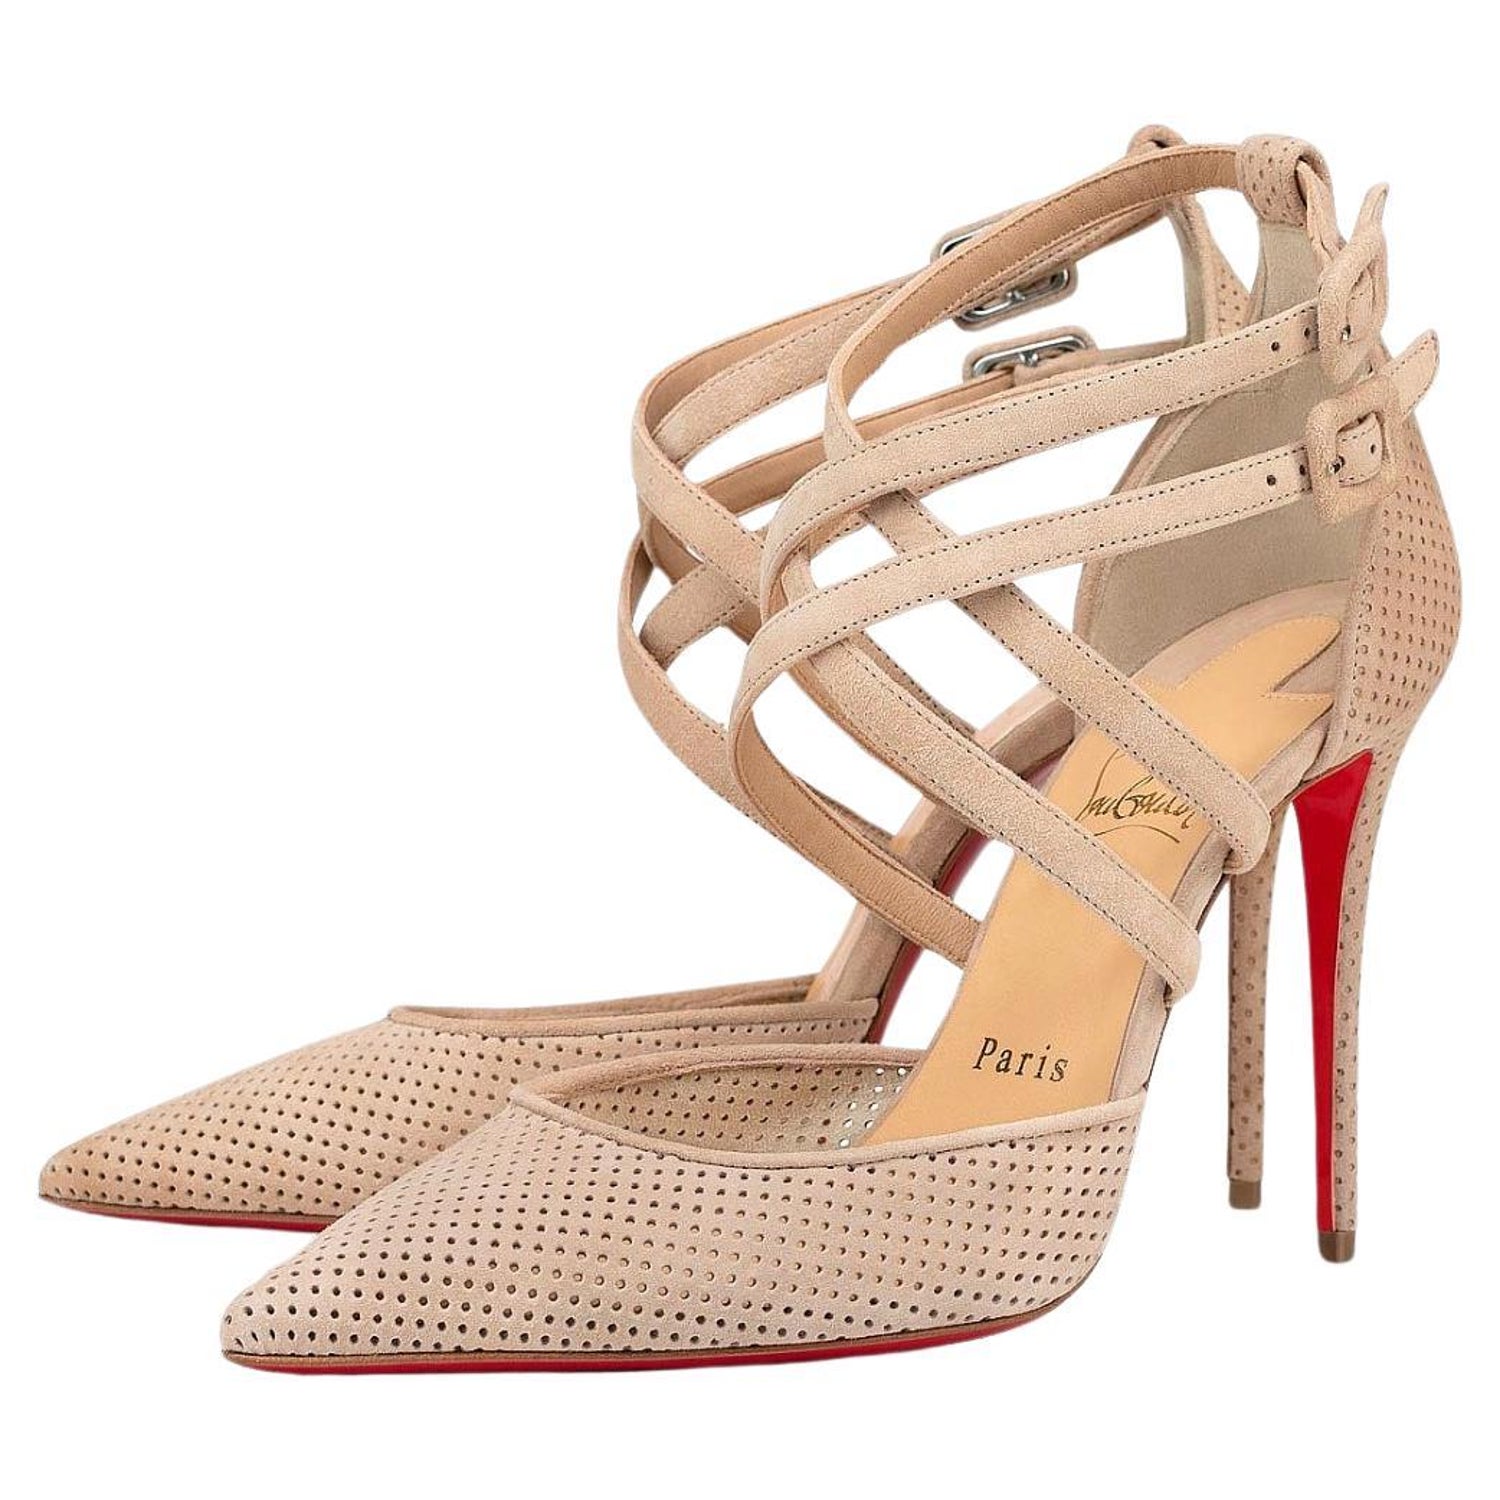 Why Louboutin Shoes Are So Expensive